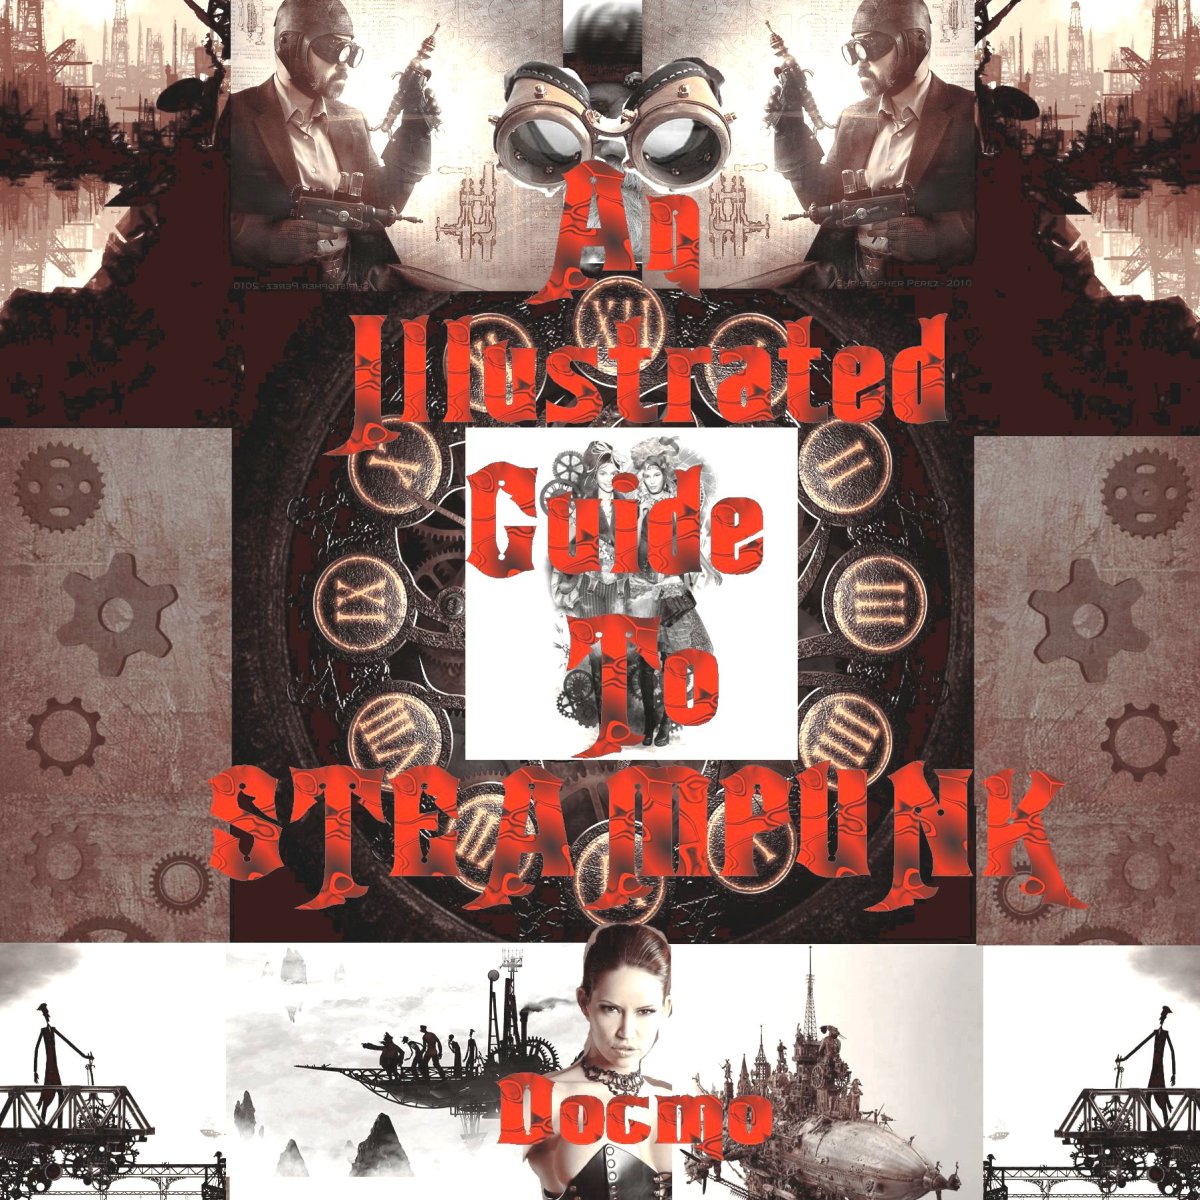 An Illustrated Guide to Steampunk 1- The Origin of a Genre